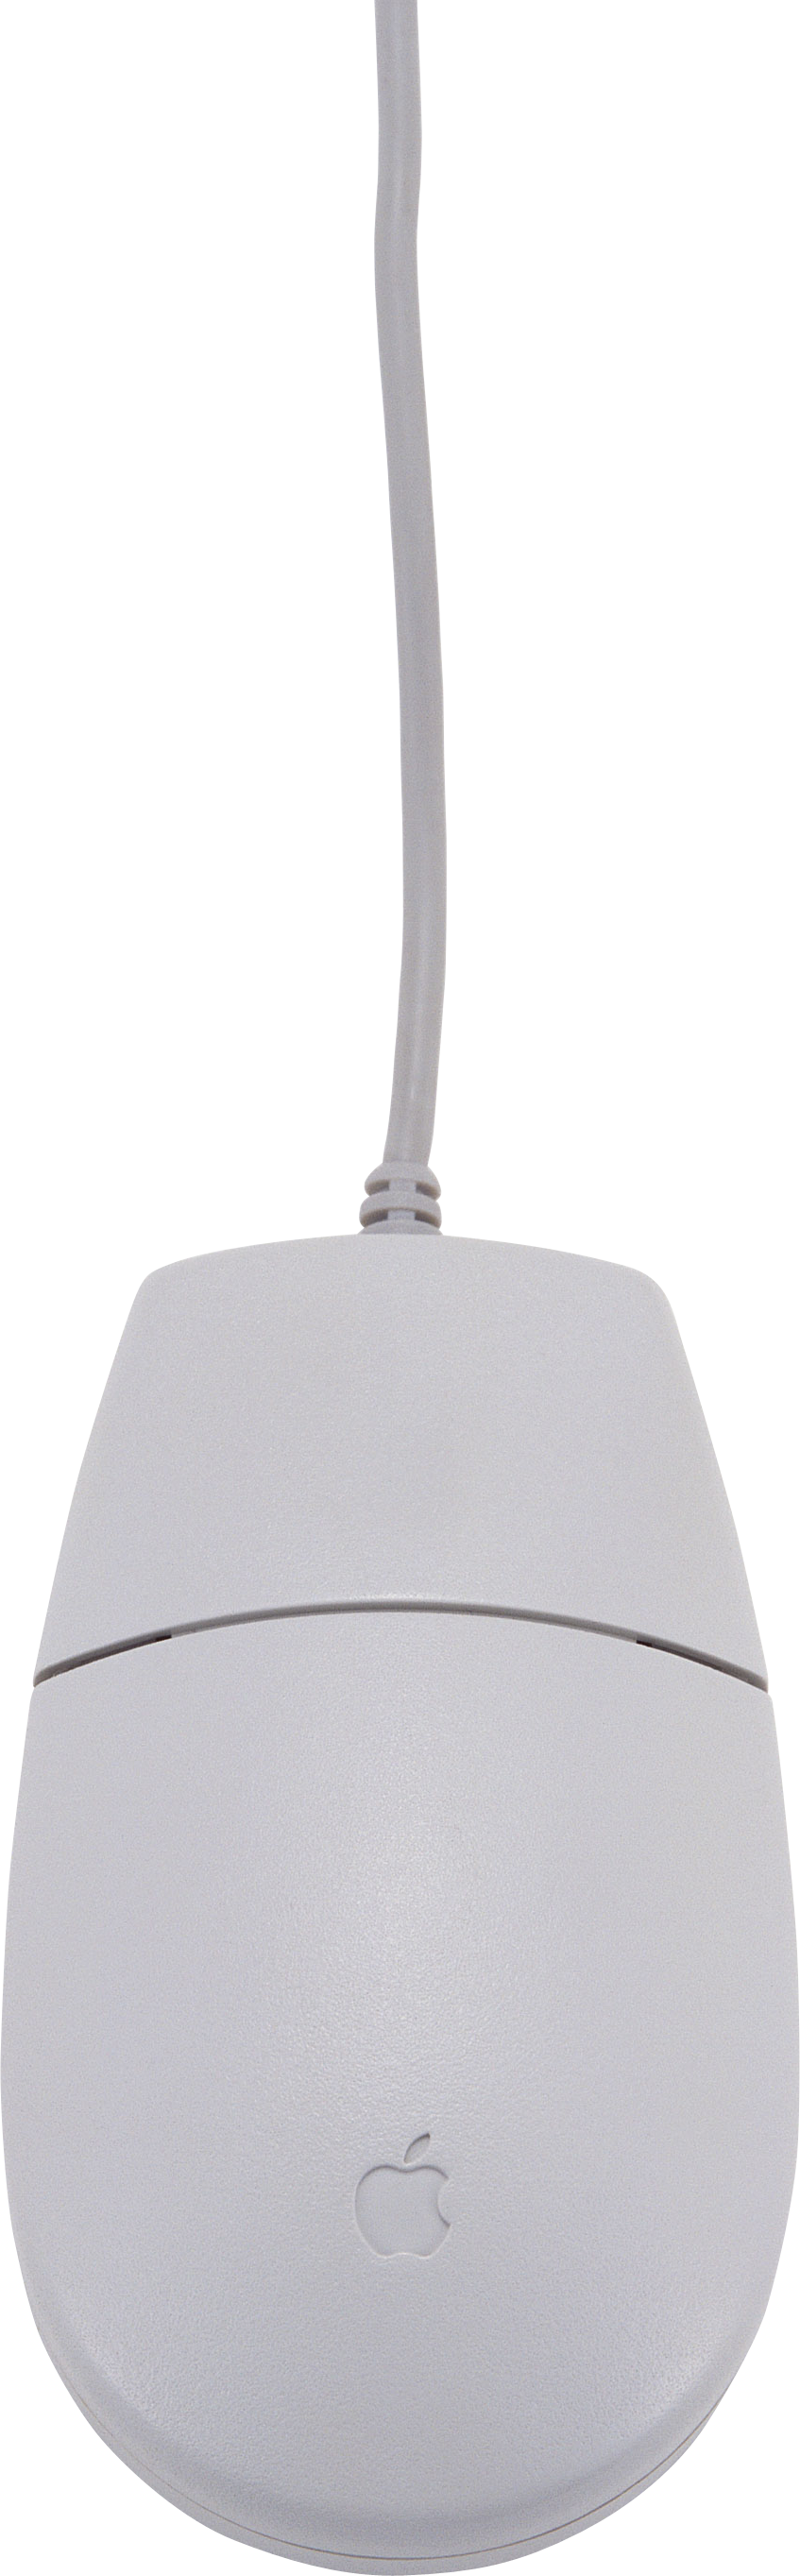 White Apple Computer Mouse PNG image